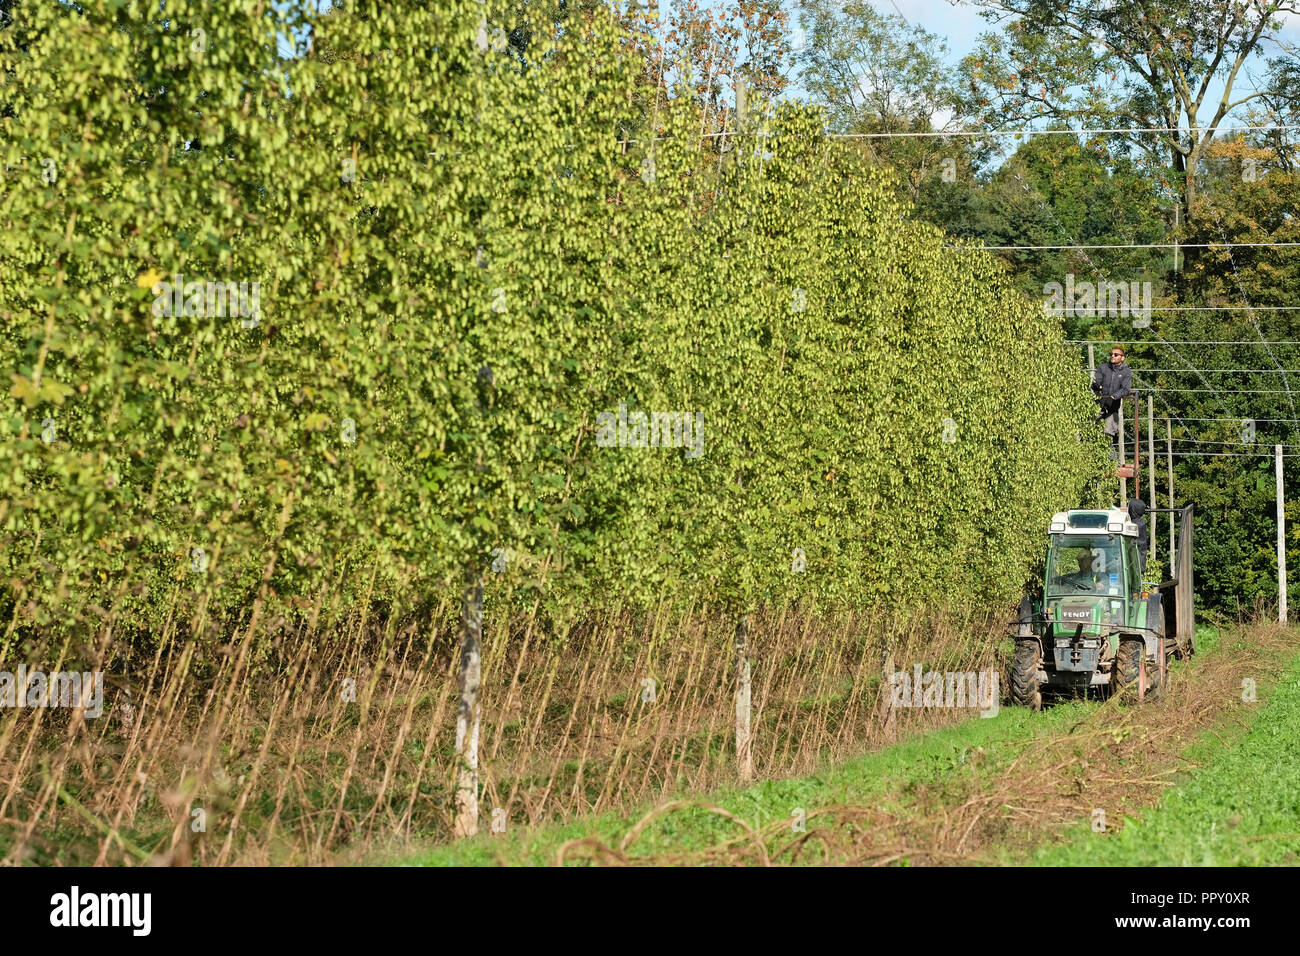 Stocks Farm, Suckley, Worcestershire - Friday 28th September 2018 -  EU seasonal workers from Poland and Bulgaria cutting hops ( Jester variety ) in the fine Autumn sunshine - after a long hot dry summer this years hop yield is down on previous years. Growers face uncertainty over next years labour force as Brexit negotiations continue. Photo Steven May / Alamy Live News Stock Photo